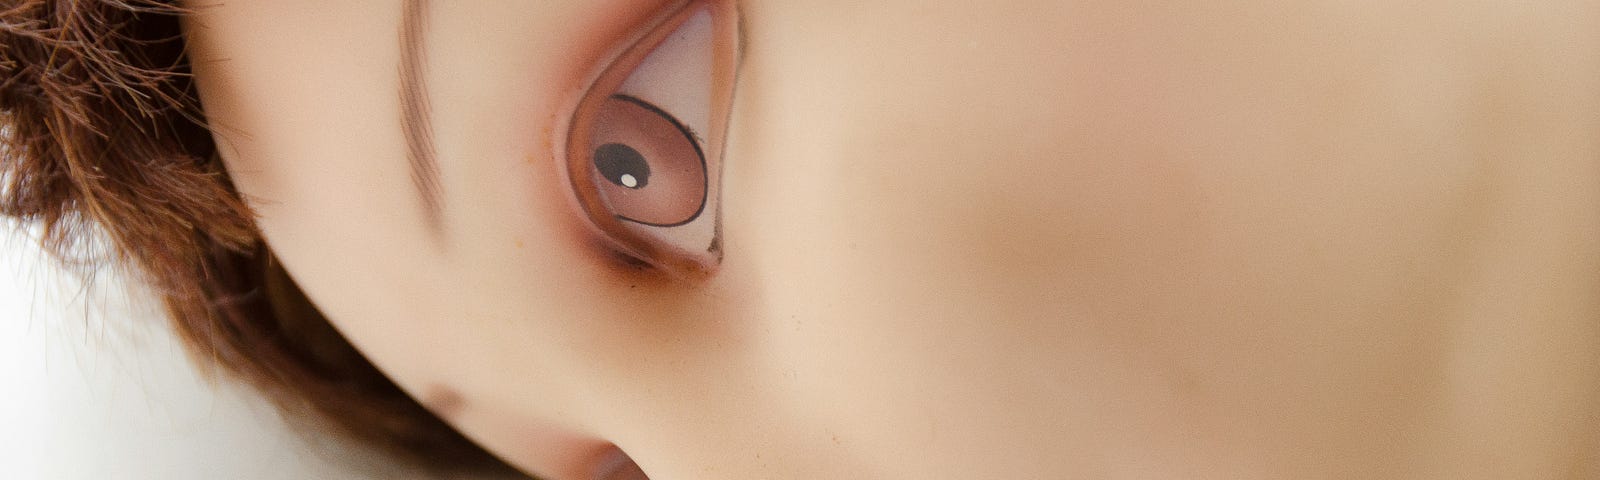 Image of robotic looking head of woman laying down with her eyes wide open but staring unexpressively into the space in front of her.